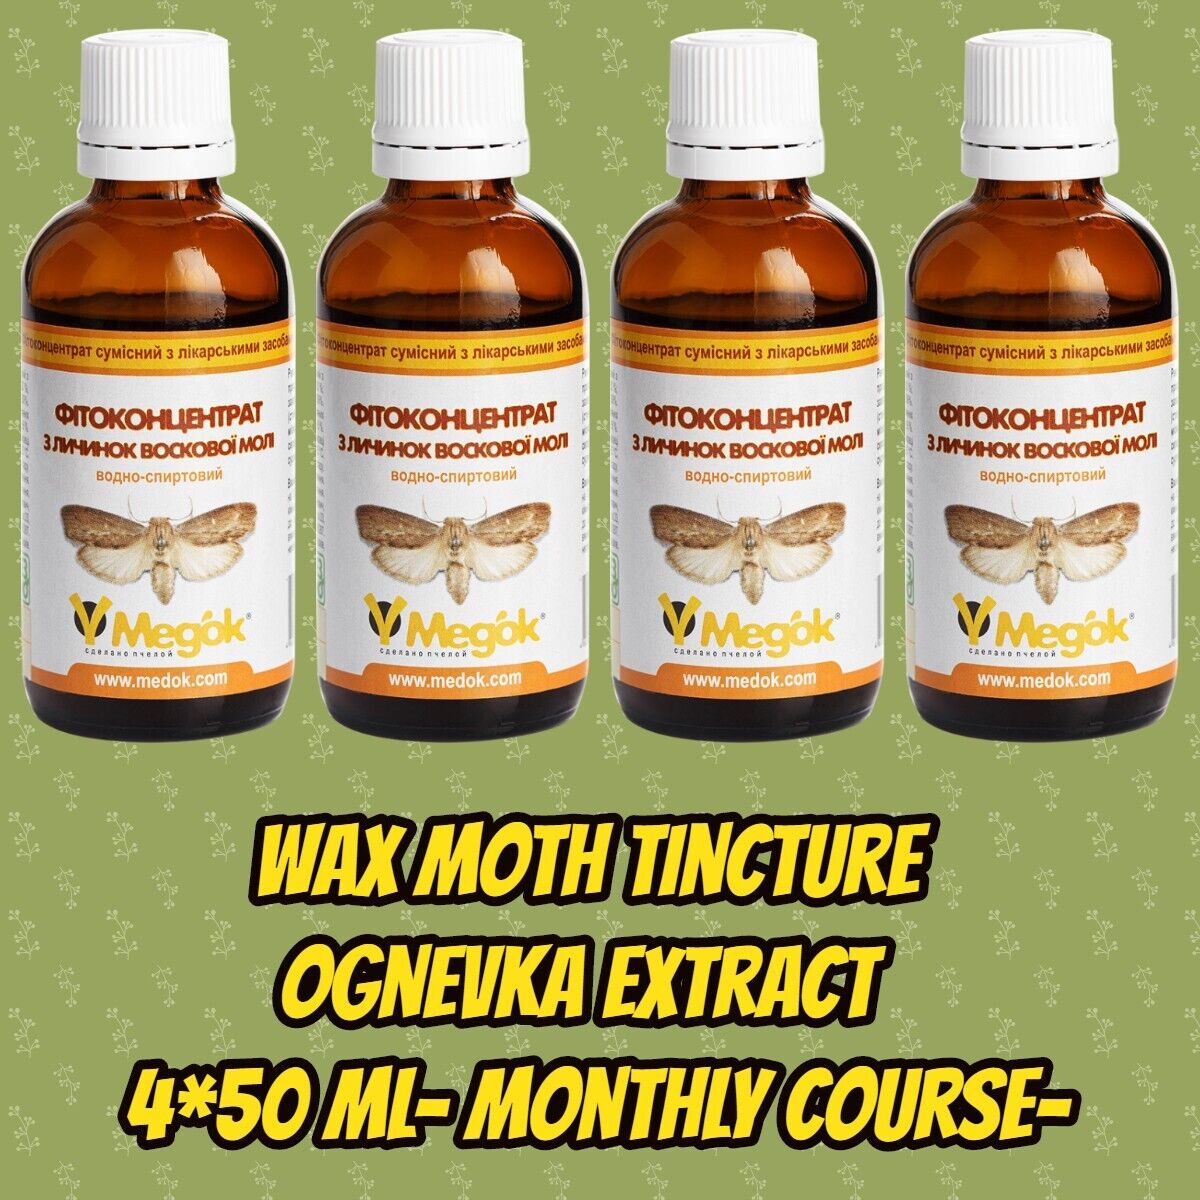 Wax Moth Tincture Ognevka Extract  4*50 ml- Monthly Course-organic beekeeping UA